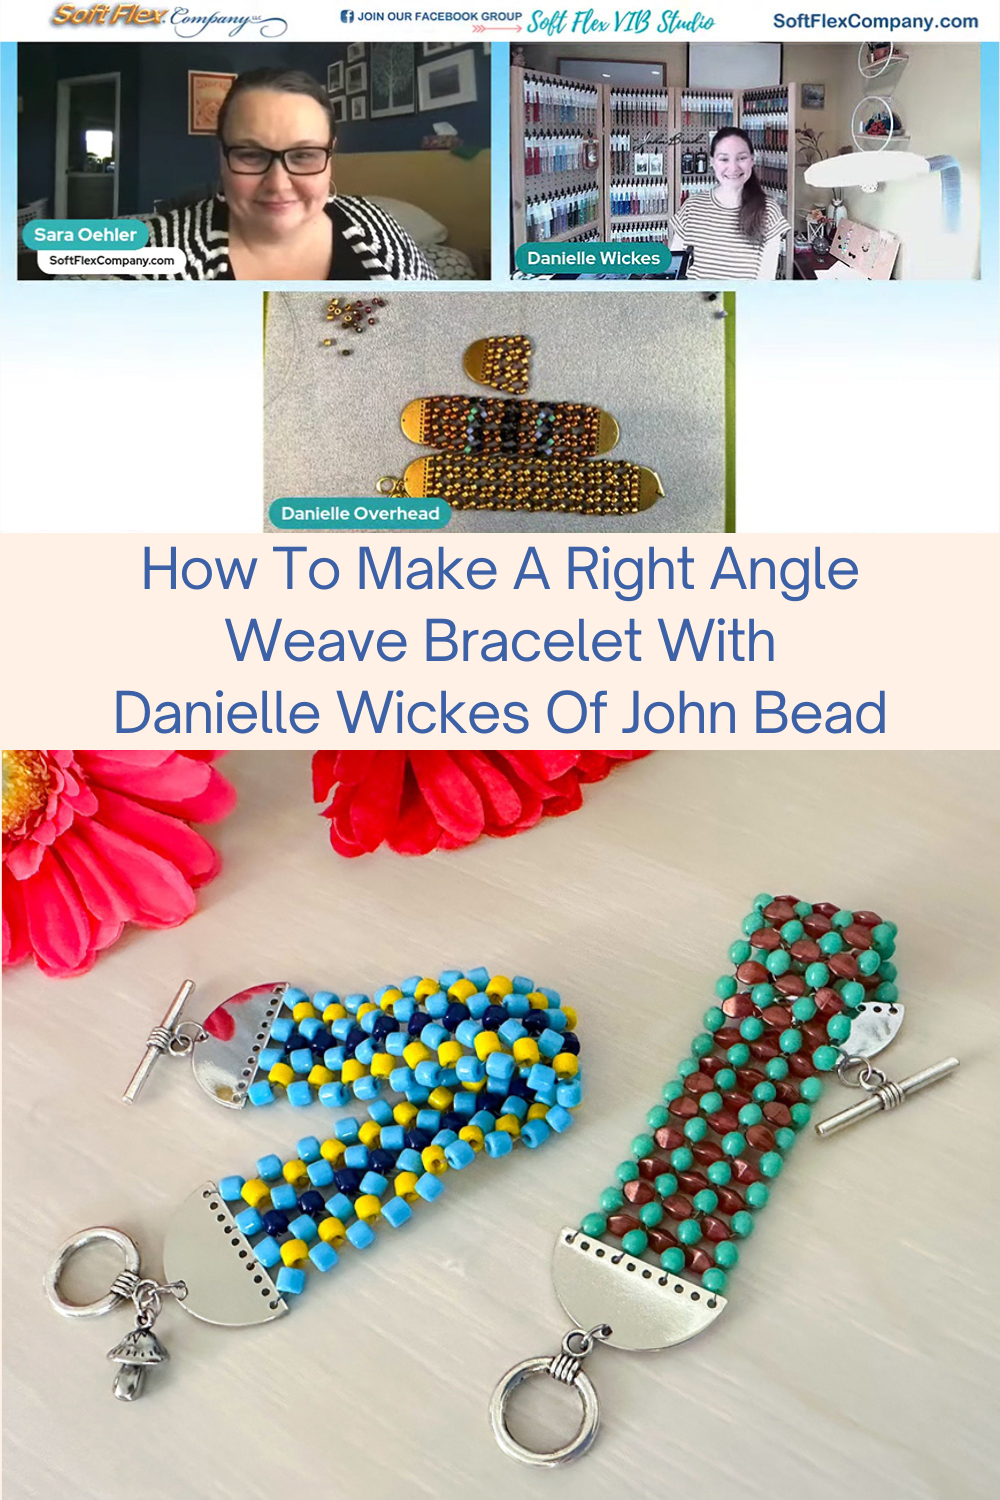 How To Make A Right Angle Weave Bracelet With Danielle Wickes Of John Bead Collage